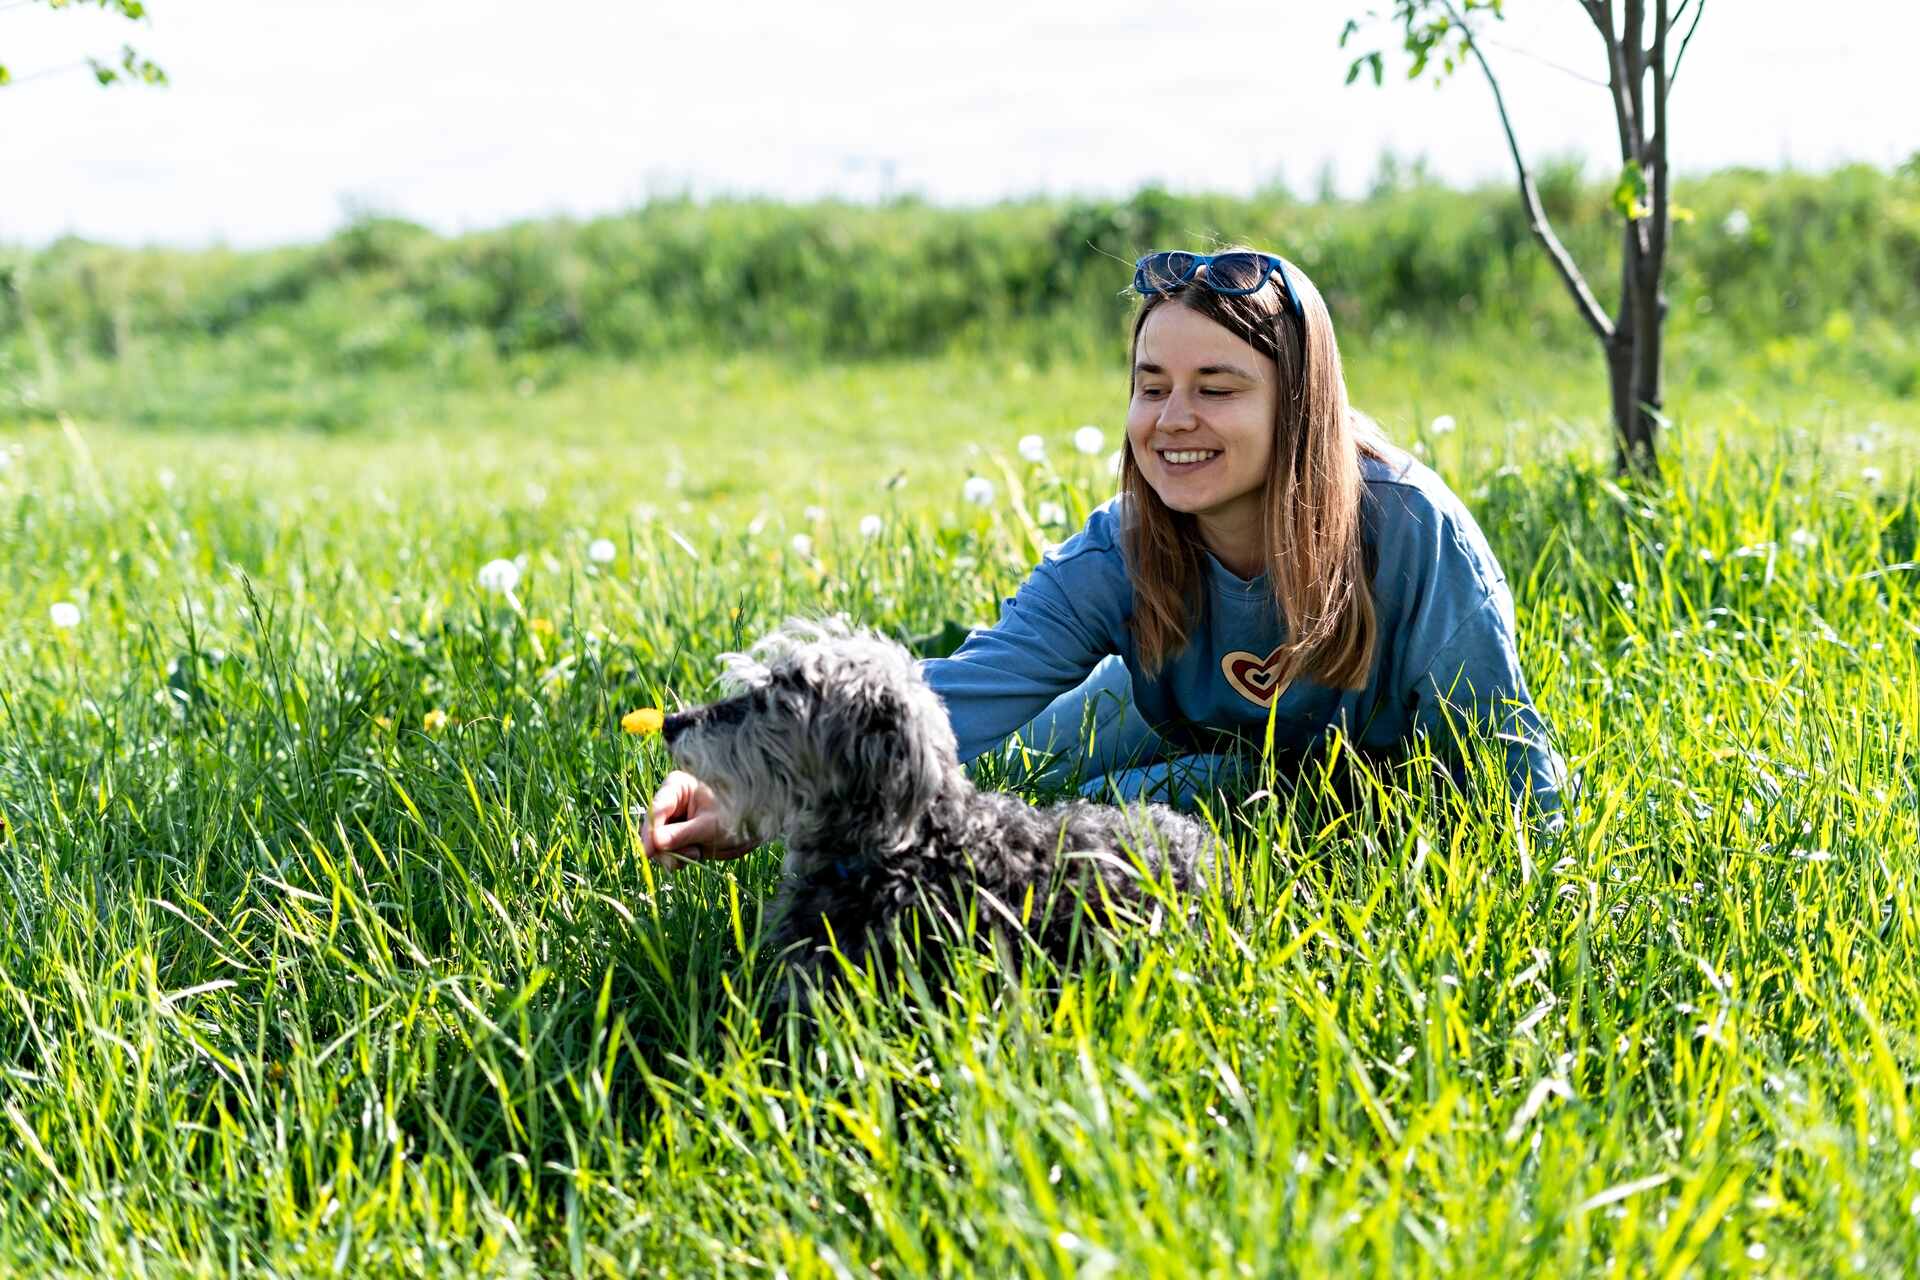 A woman sitting with an Irish Wolfhound in a grassy field